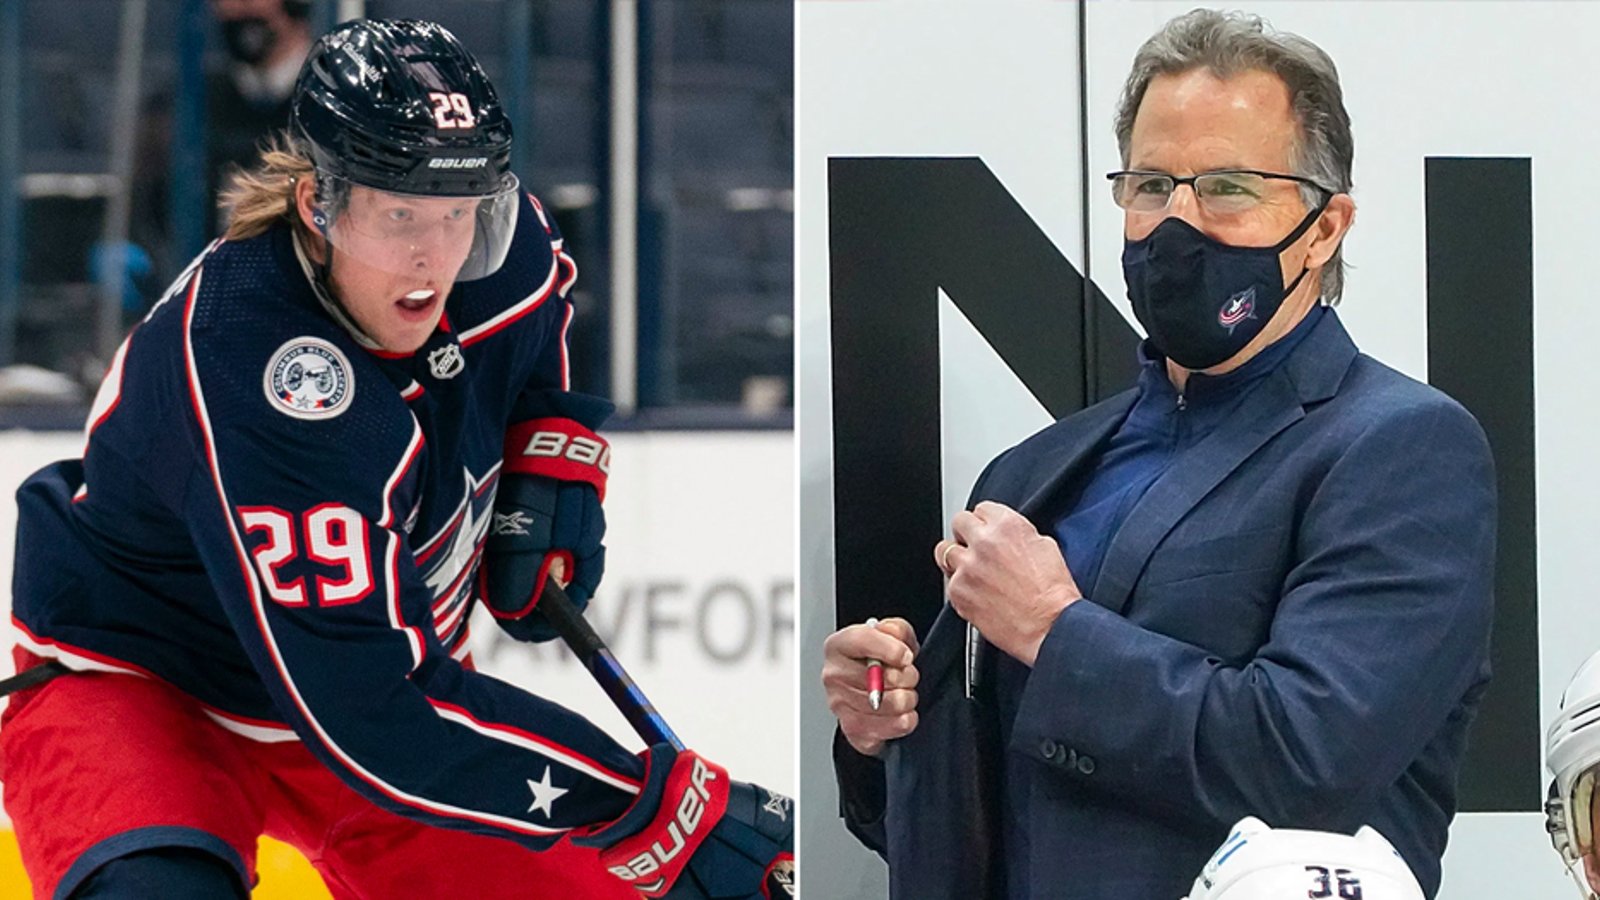 Laine benched for “verbally disrespecting” one of Tortorella's assistants